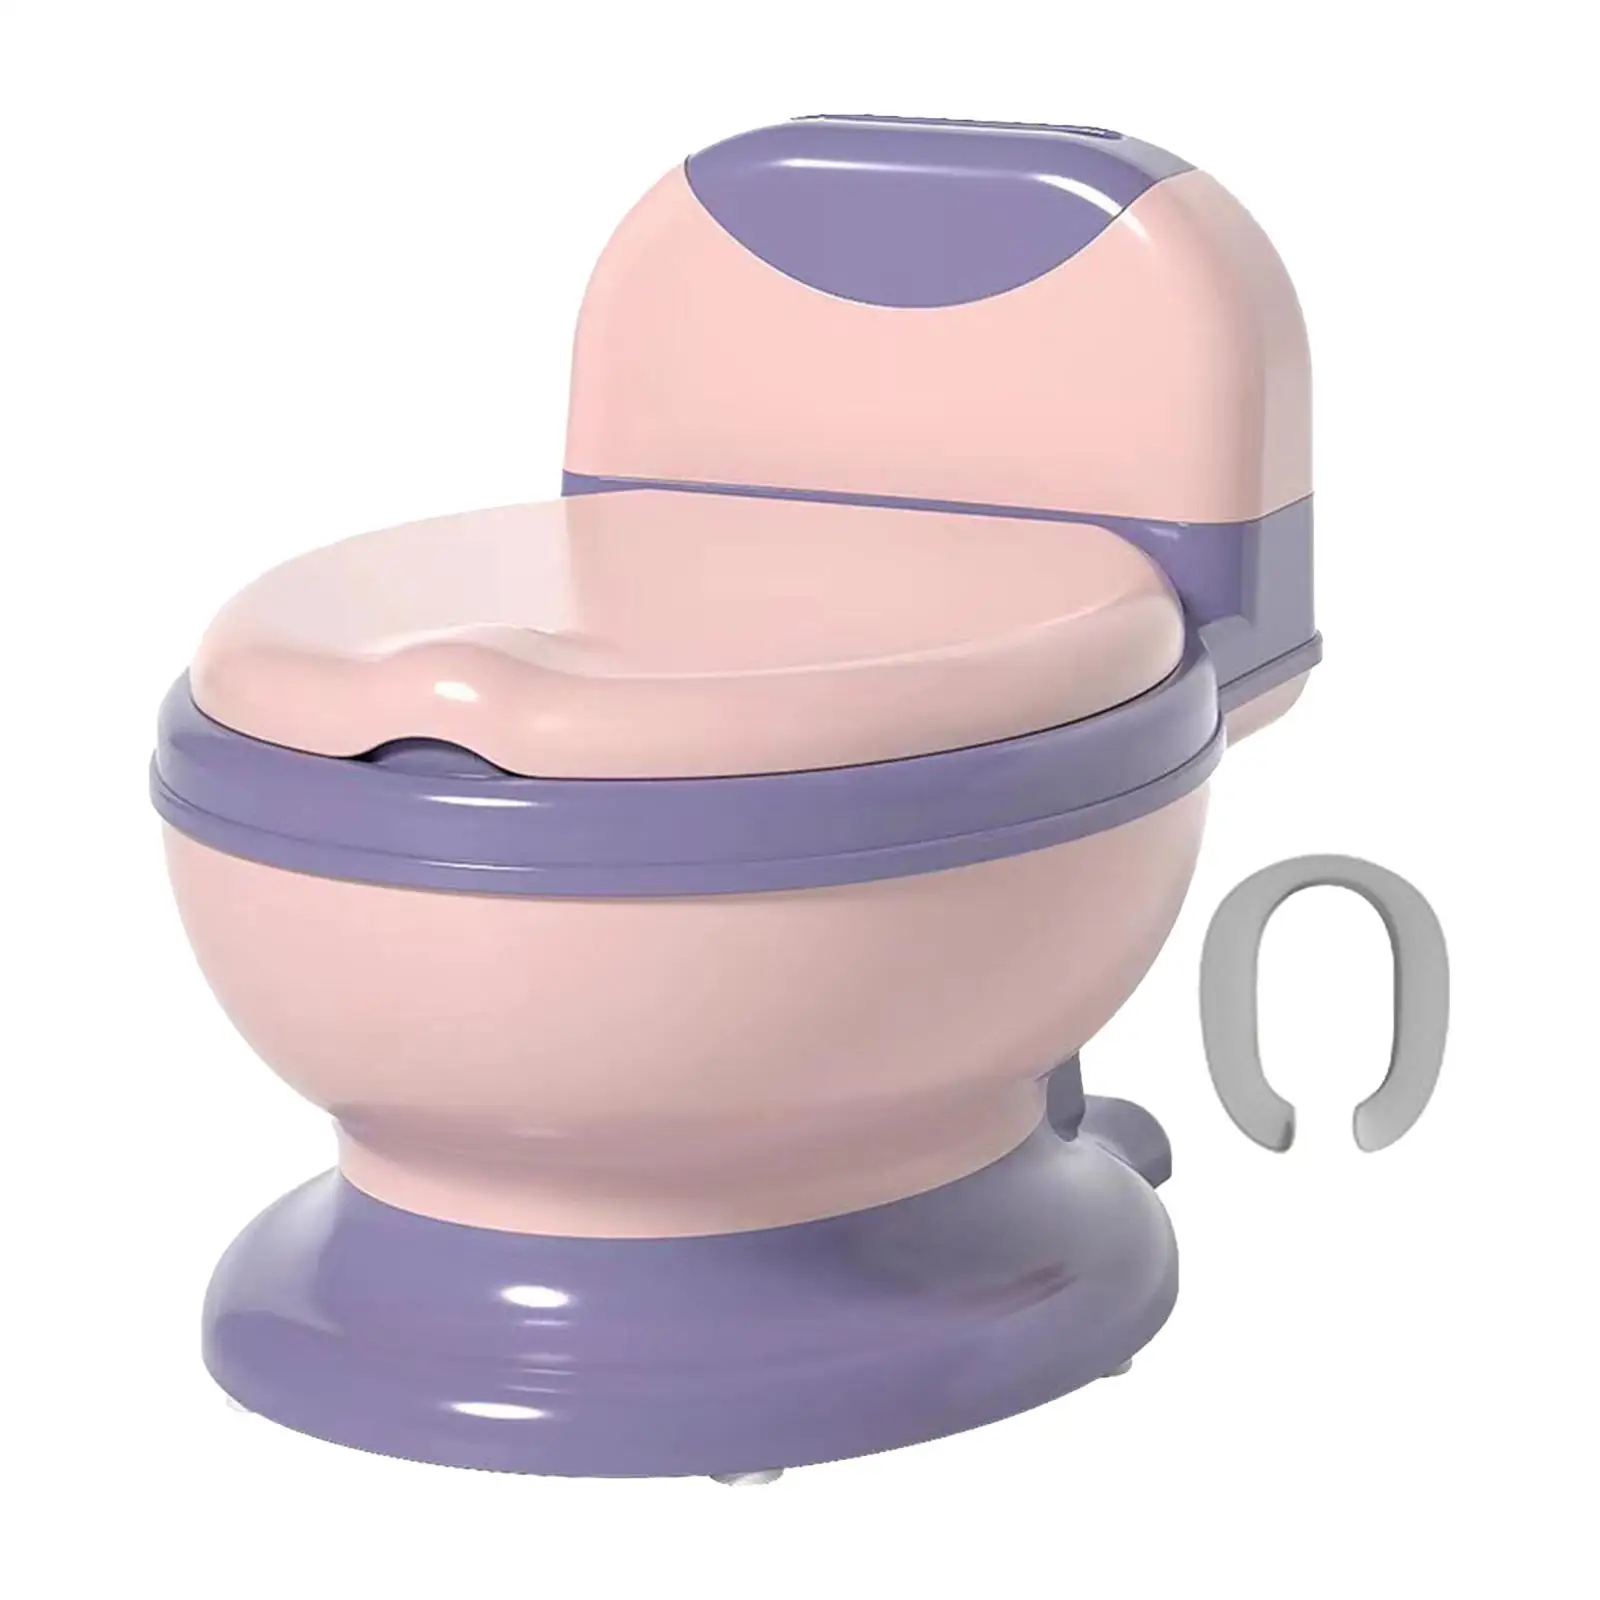 Potty Train Toilet Potty Train Seat Comfortable Realistic Toilet Real Feel Potty for Baby Toddlers Children Boys Girls